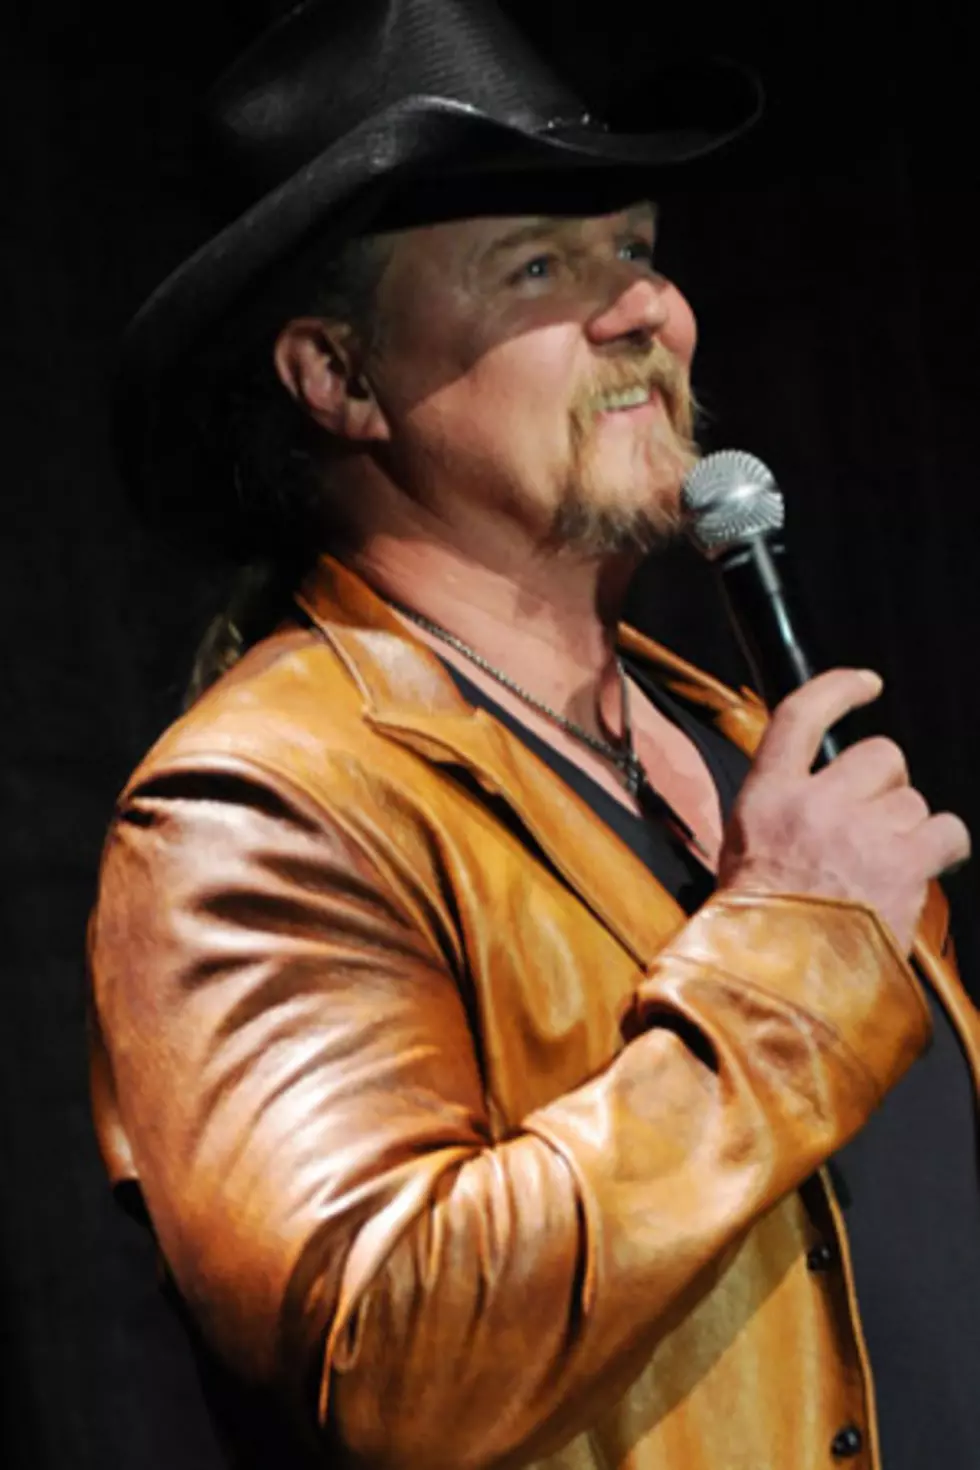 Trace Adkins Is the Proud Owner of a Strawberry-Shaped Guitar